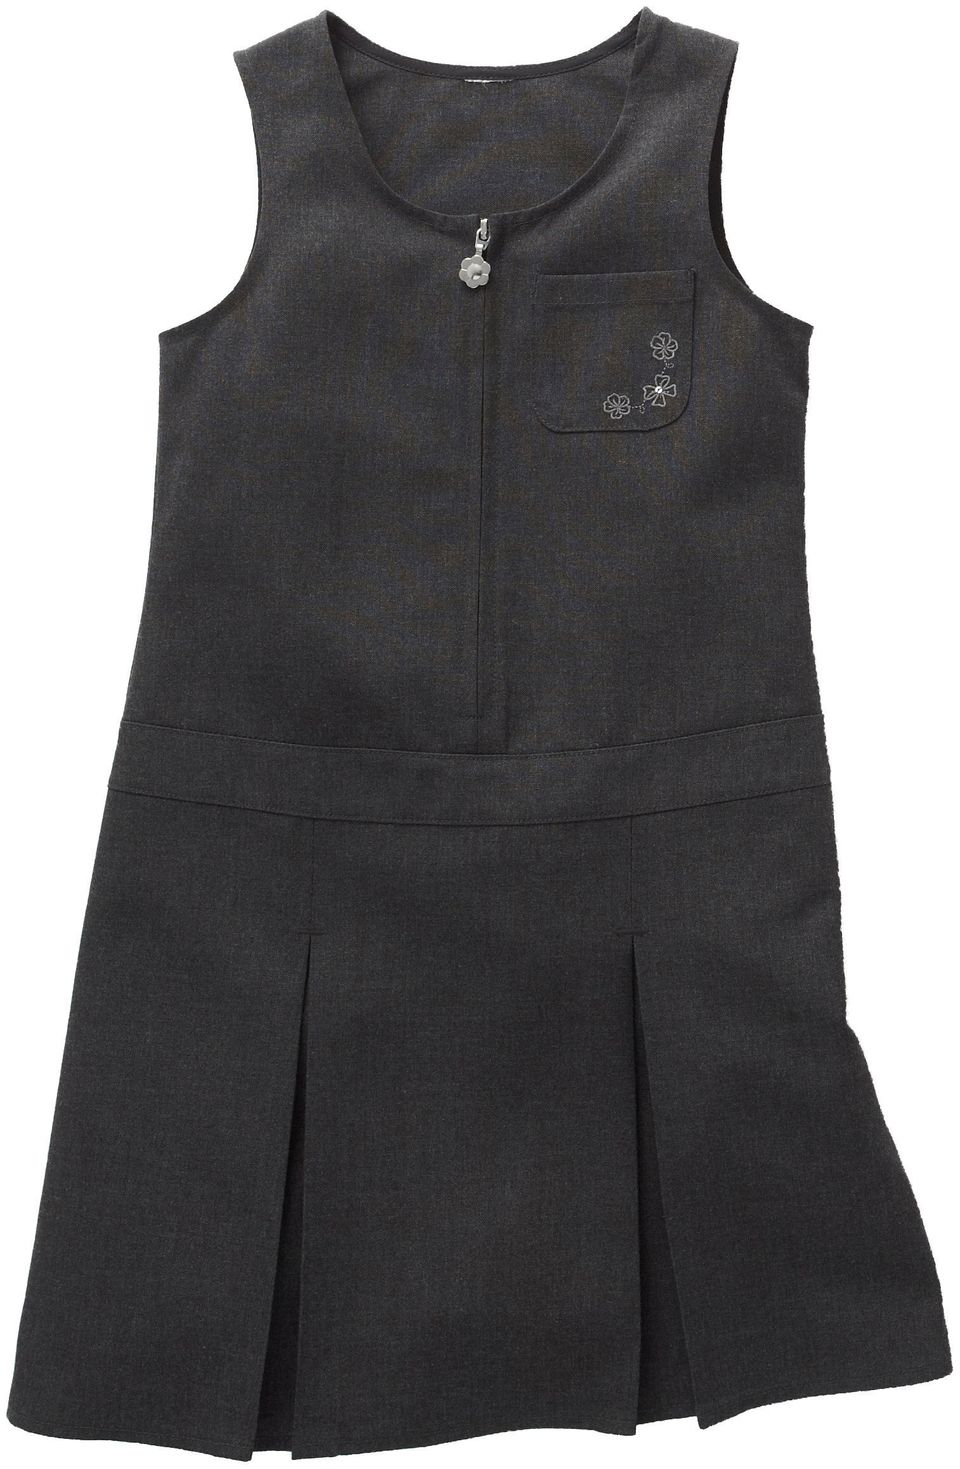 Pinafore with pleats and zip - from £4